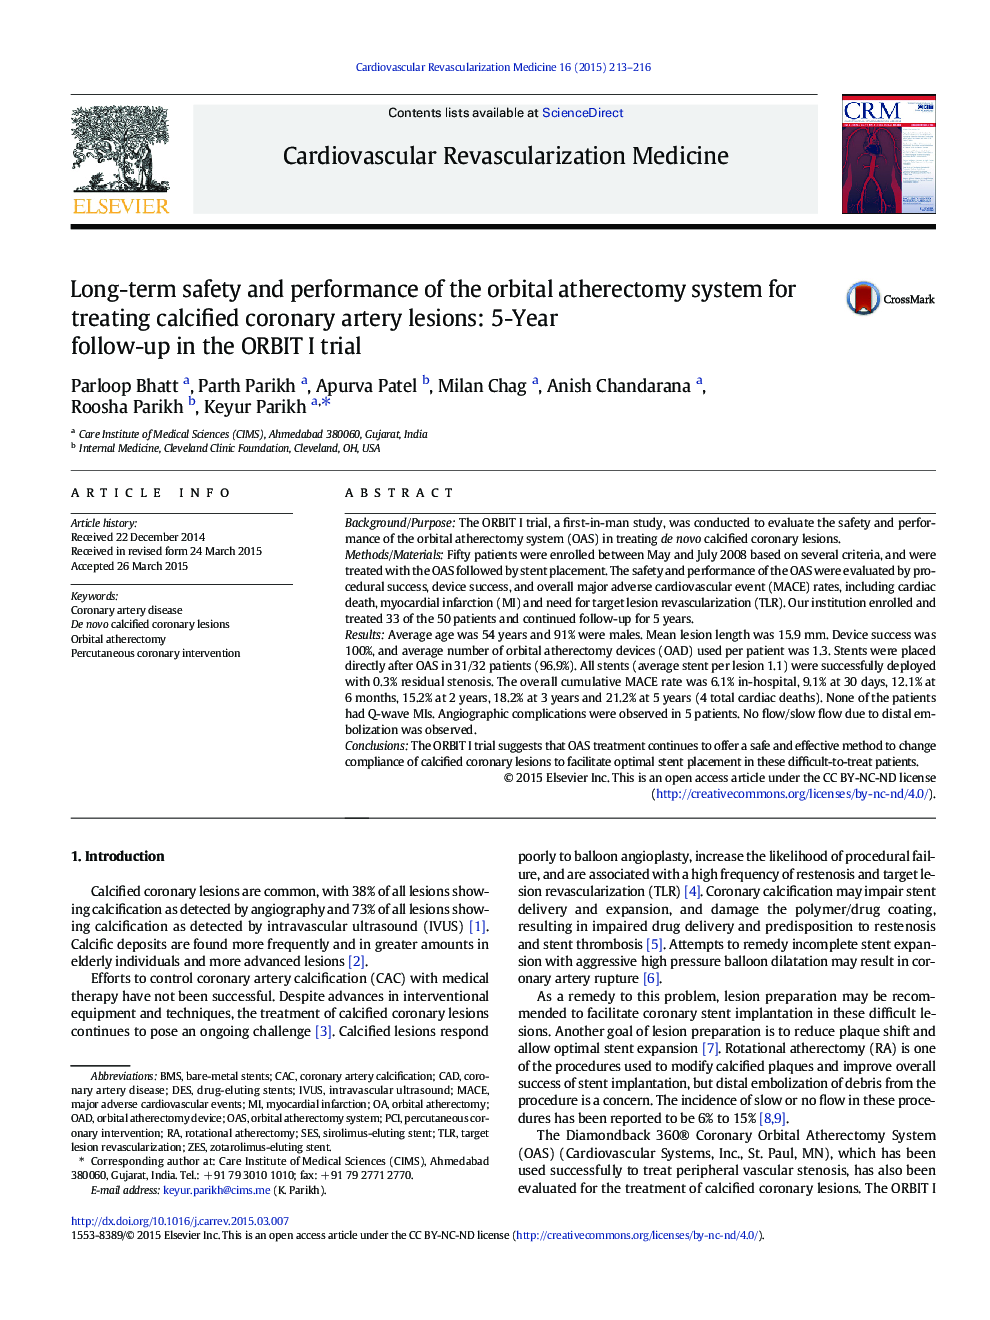 Long-term safety and performance of the orbital atherectomy system for treating calcified coronary artery lesions: 5-Year follow-up in the ORBIT I trial